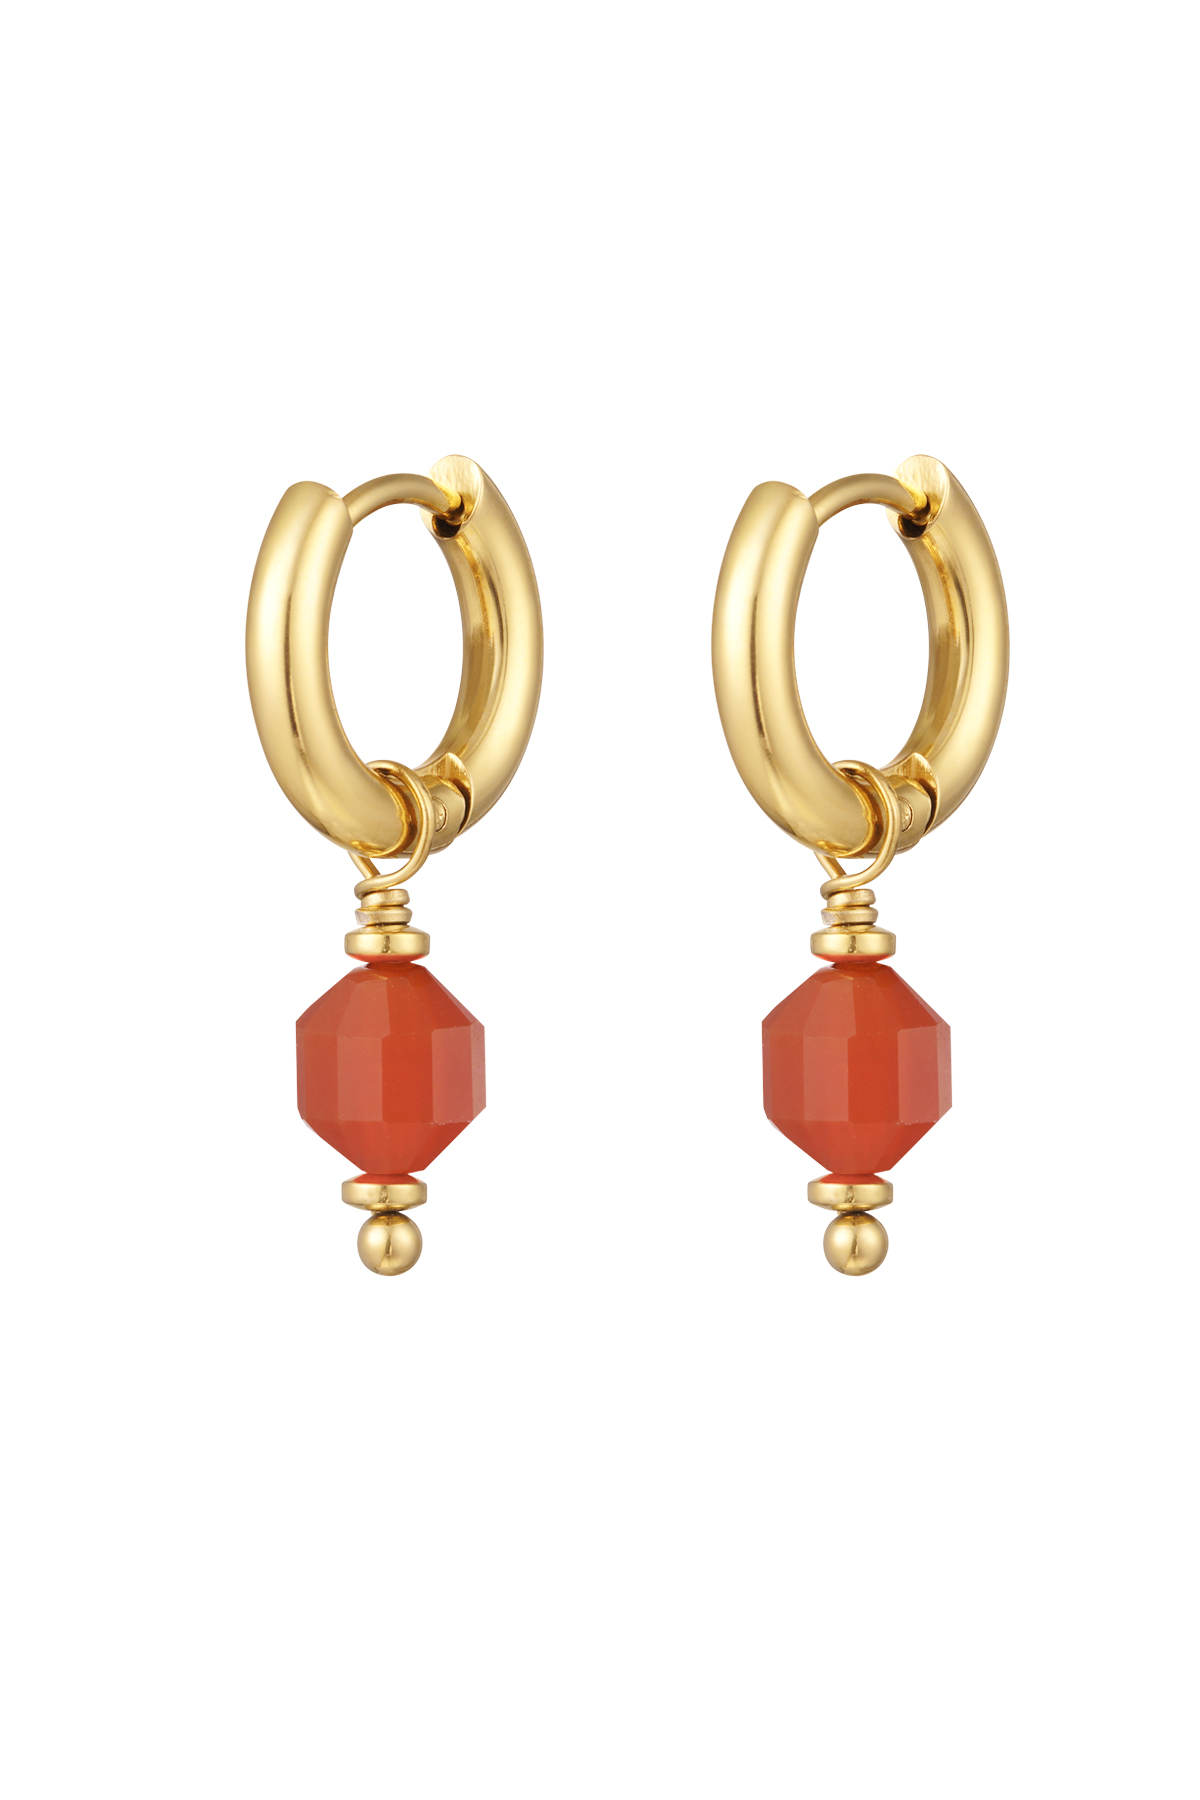 Earrings with stone July - gold/orange h5 